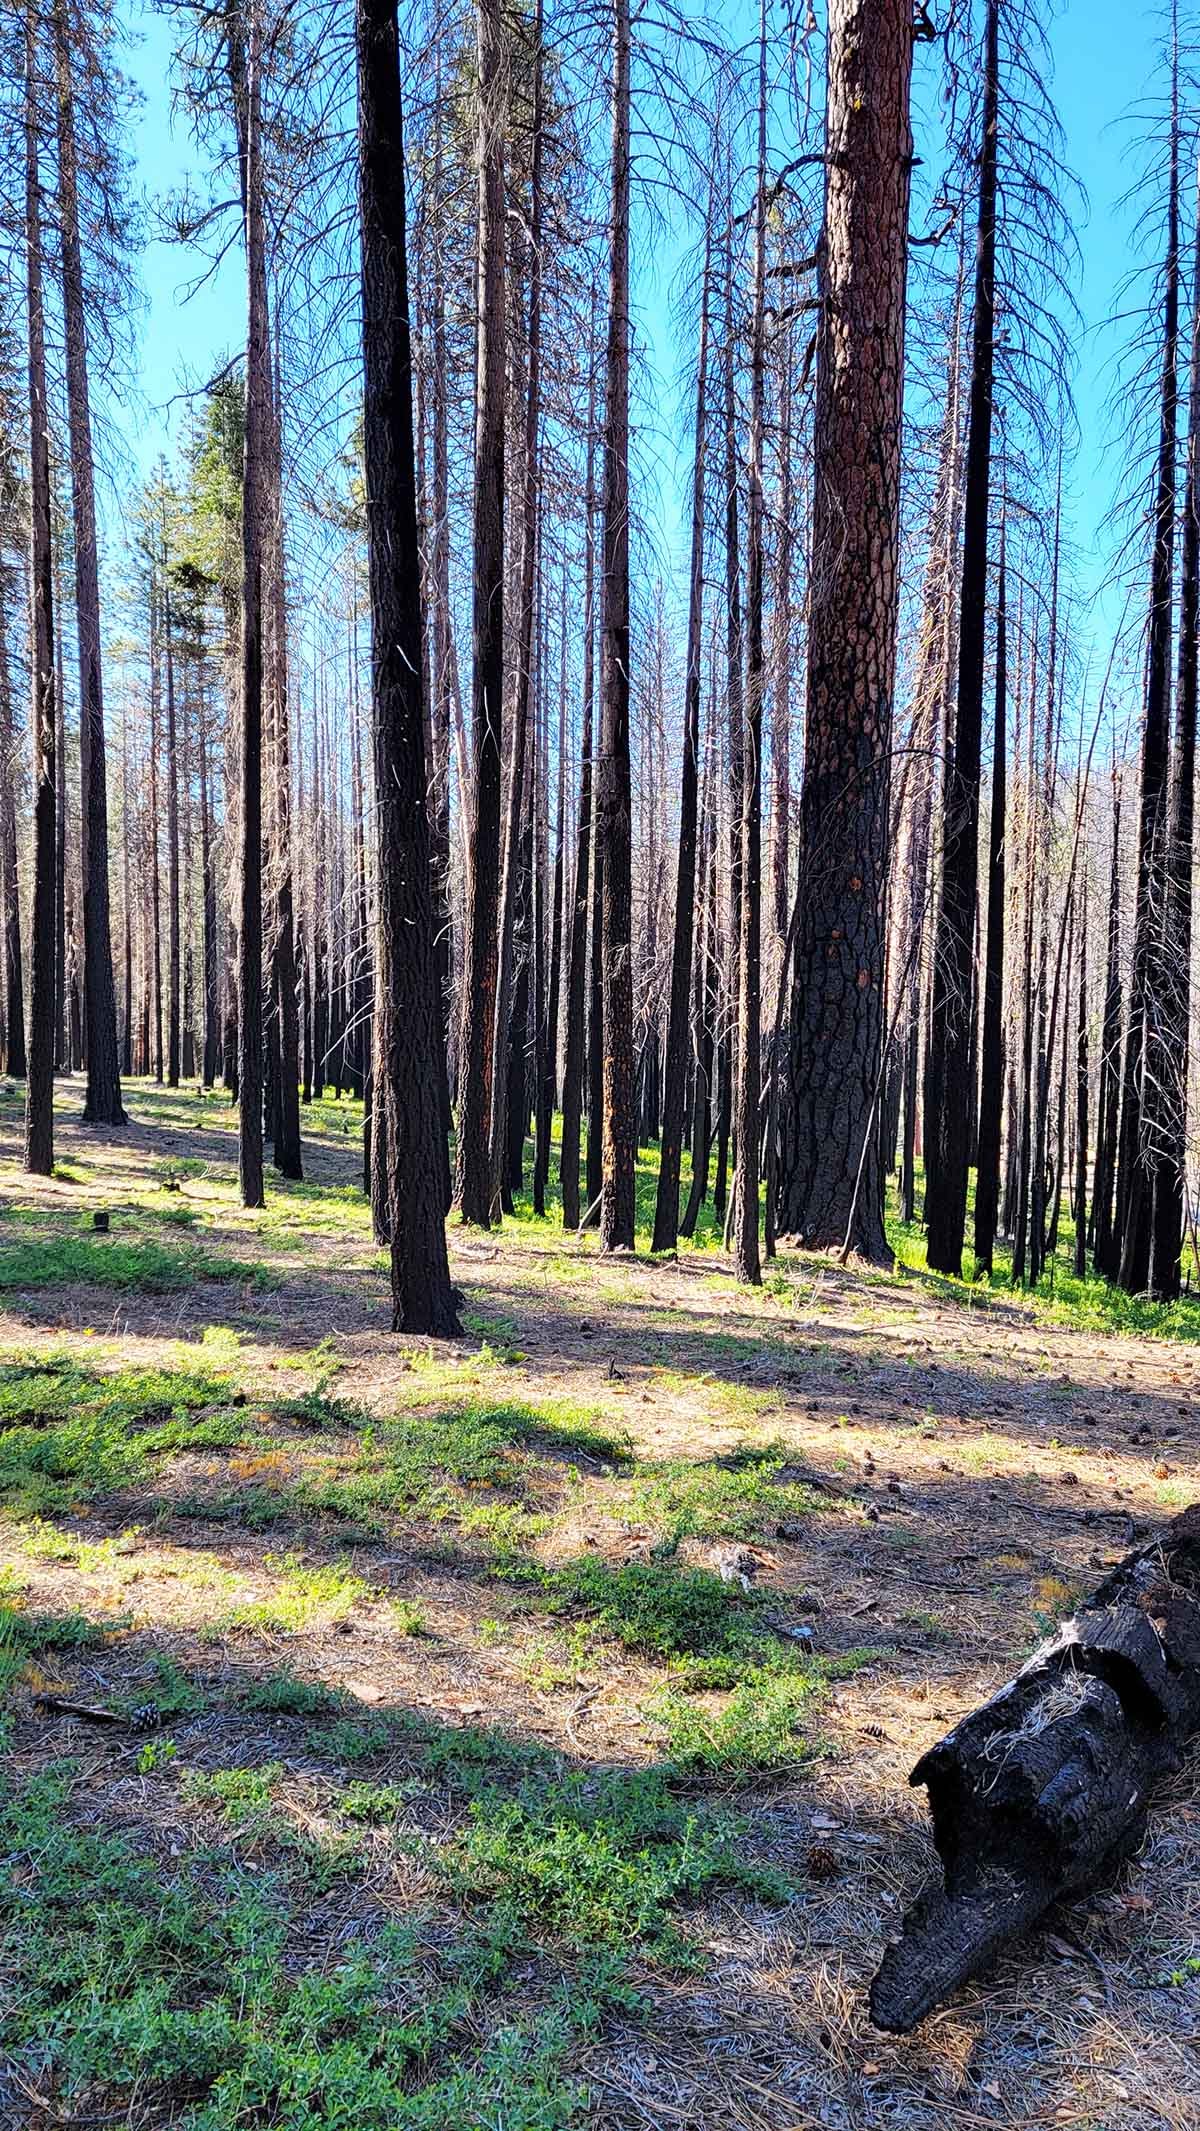 Pine trees regrowing after a forest fire in the Sierra Nevada.